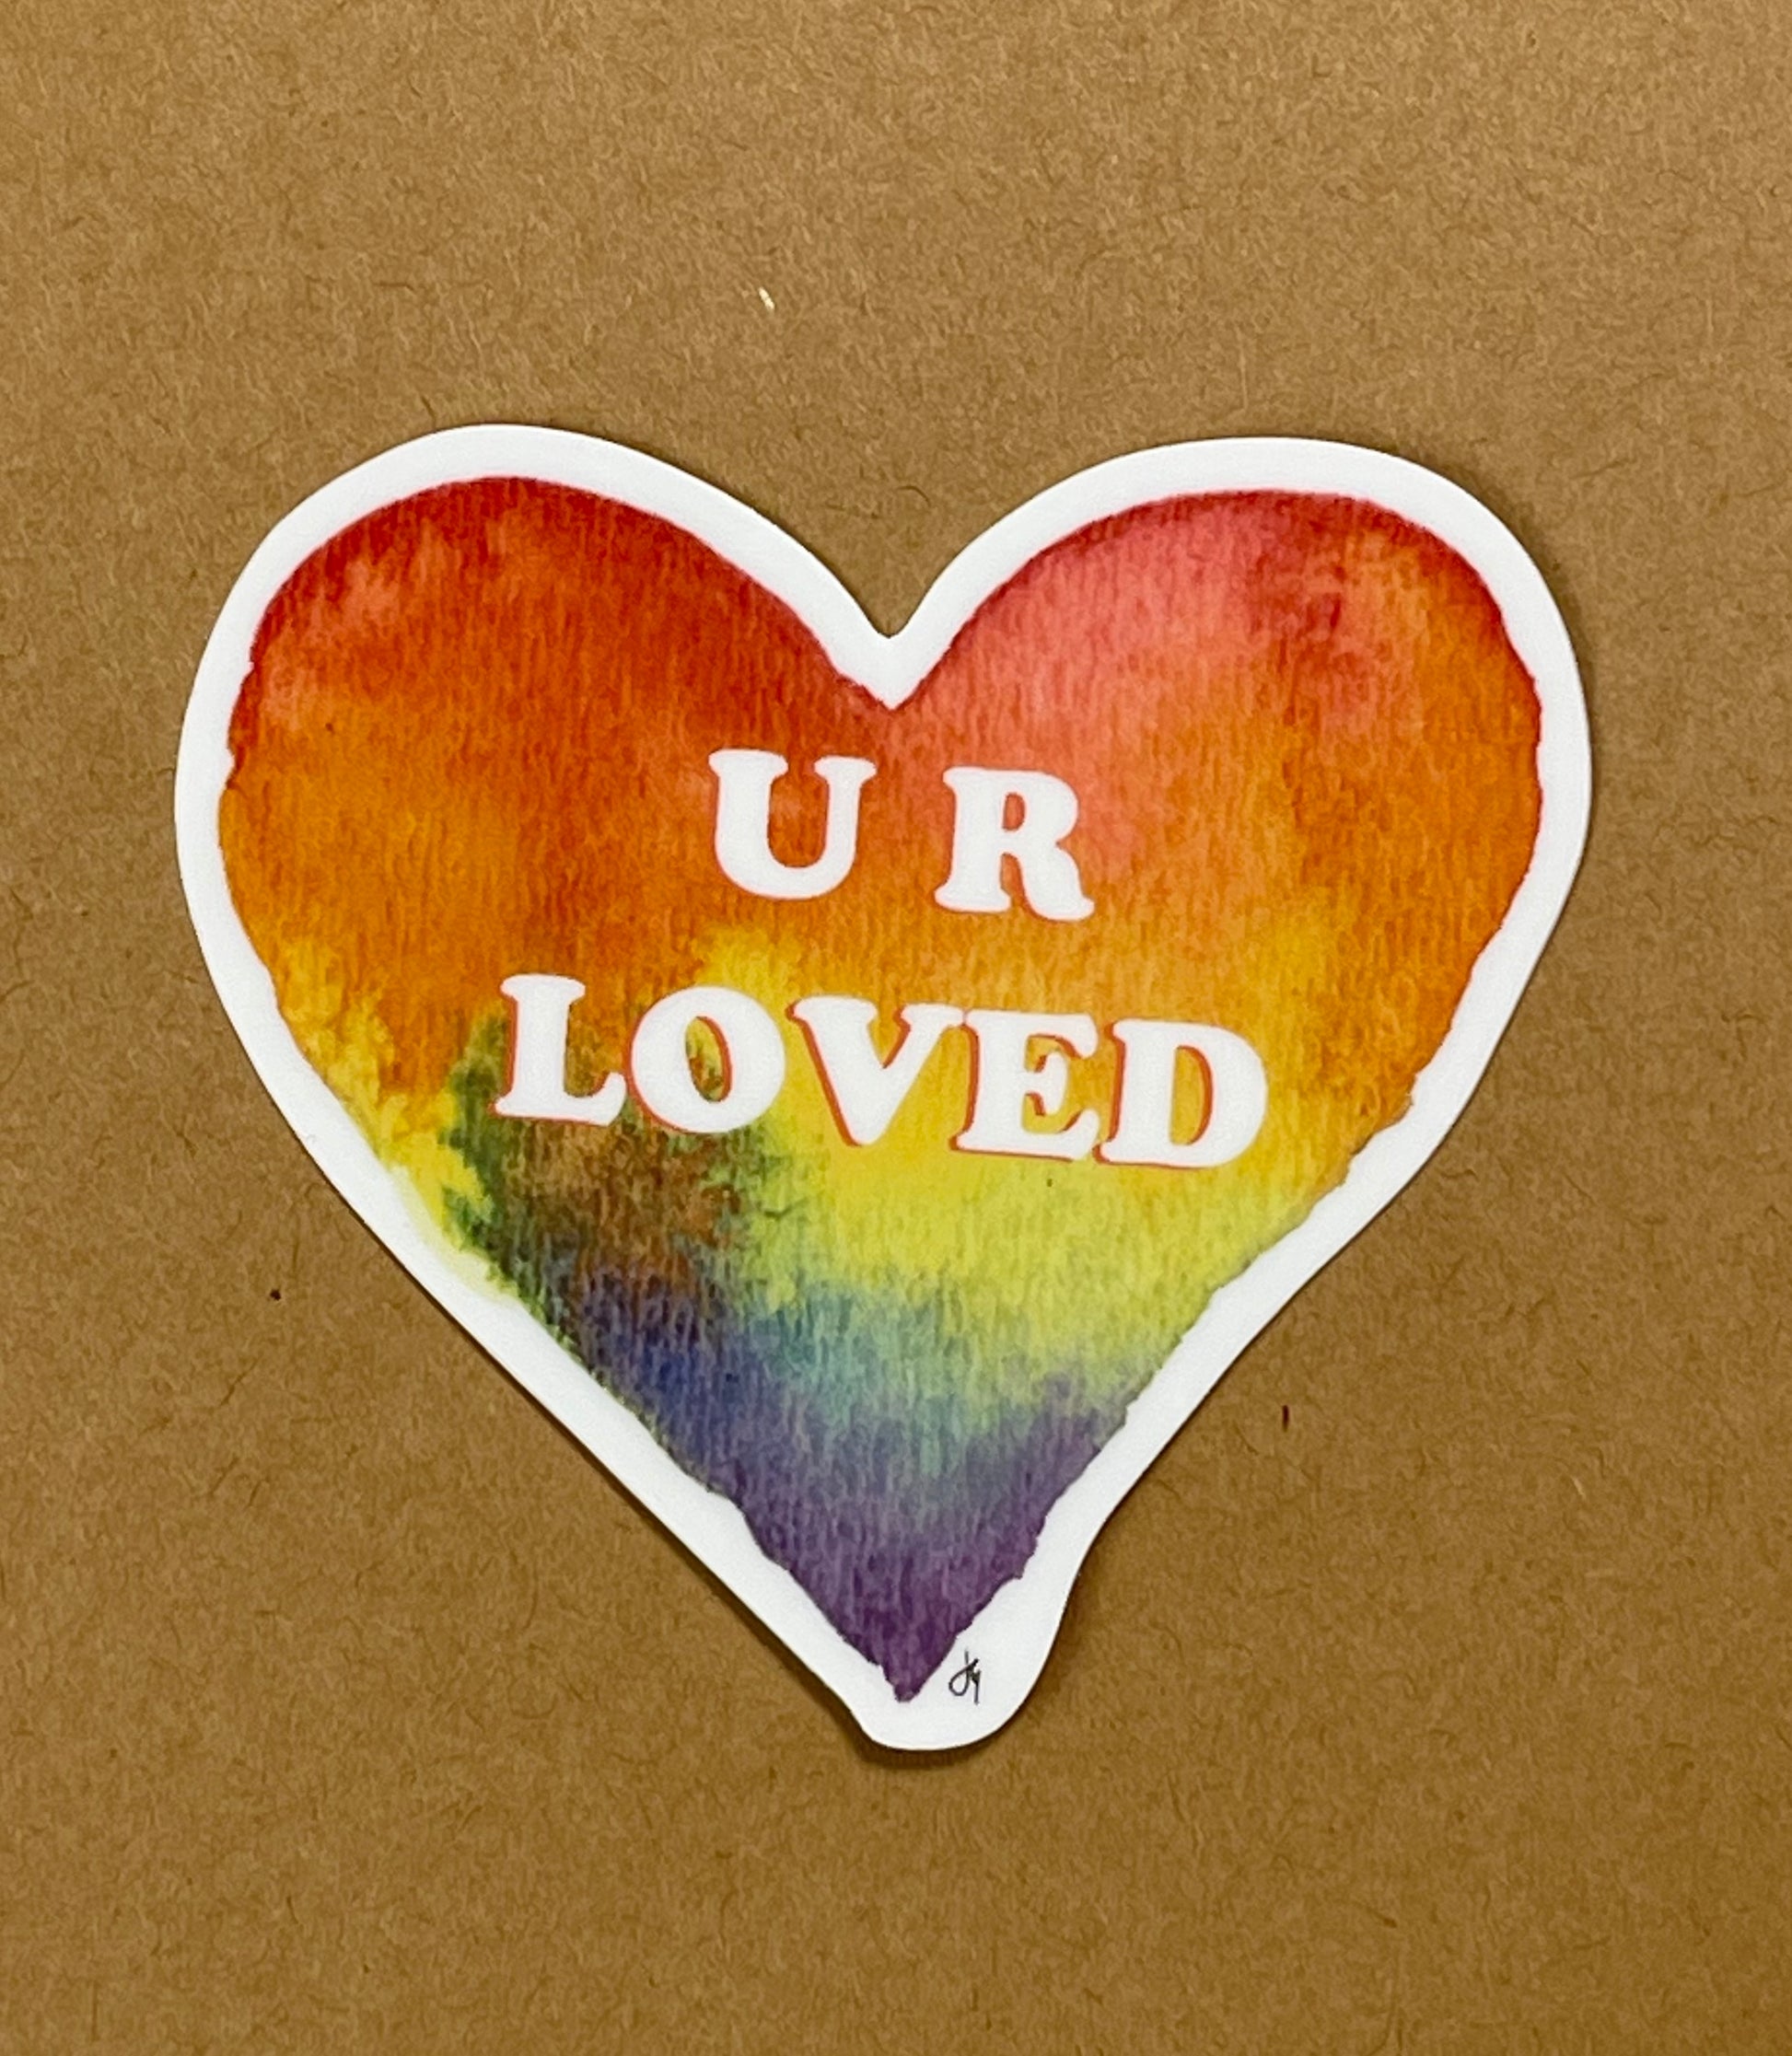 heart shaped sticker, rainbow colored and U R Loved written in the center